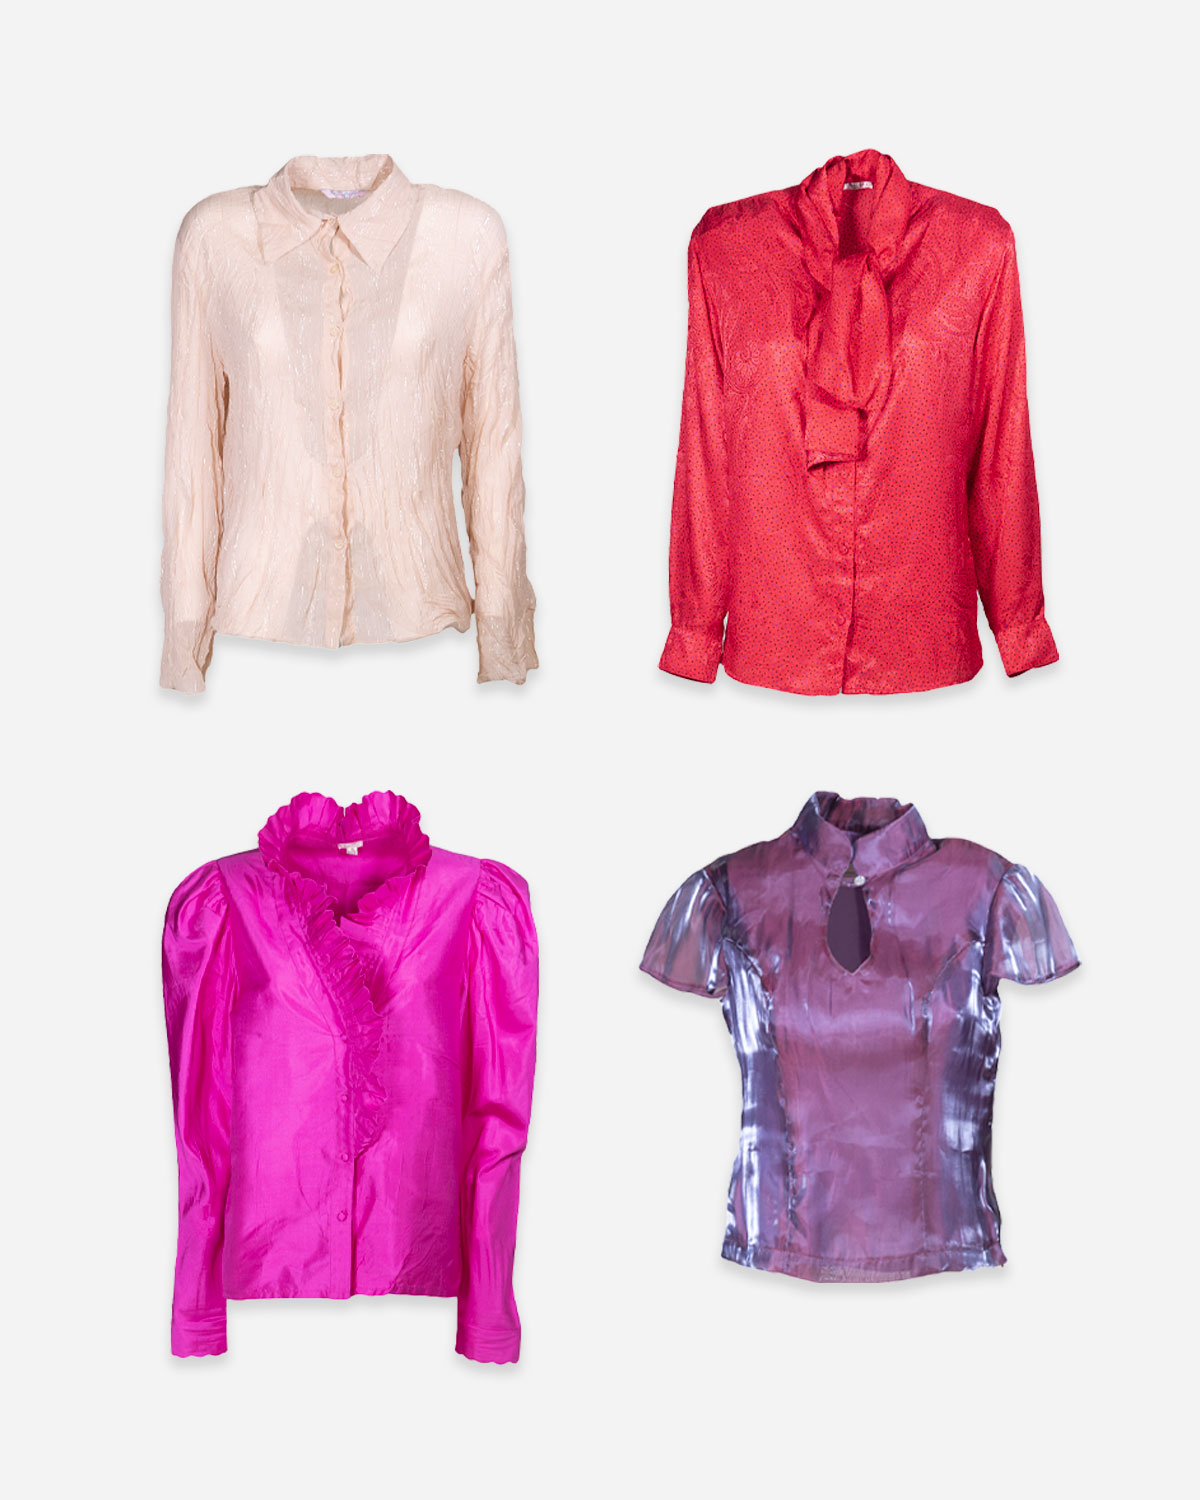 Vintage evening shirts for women: 4 pieces